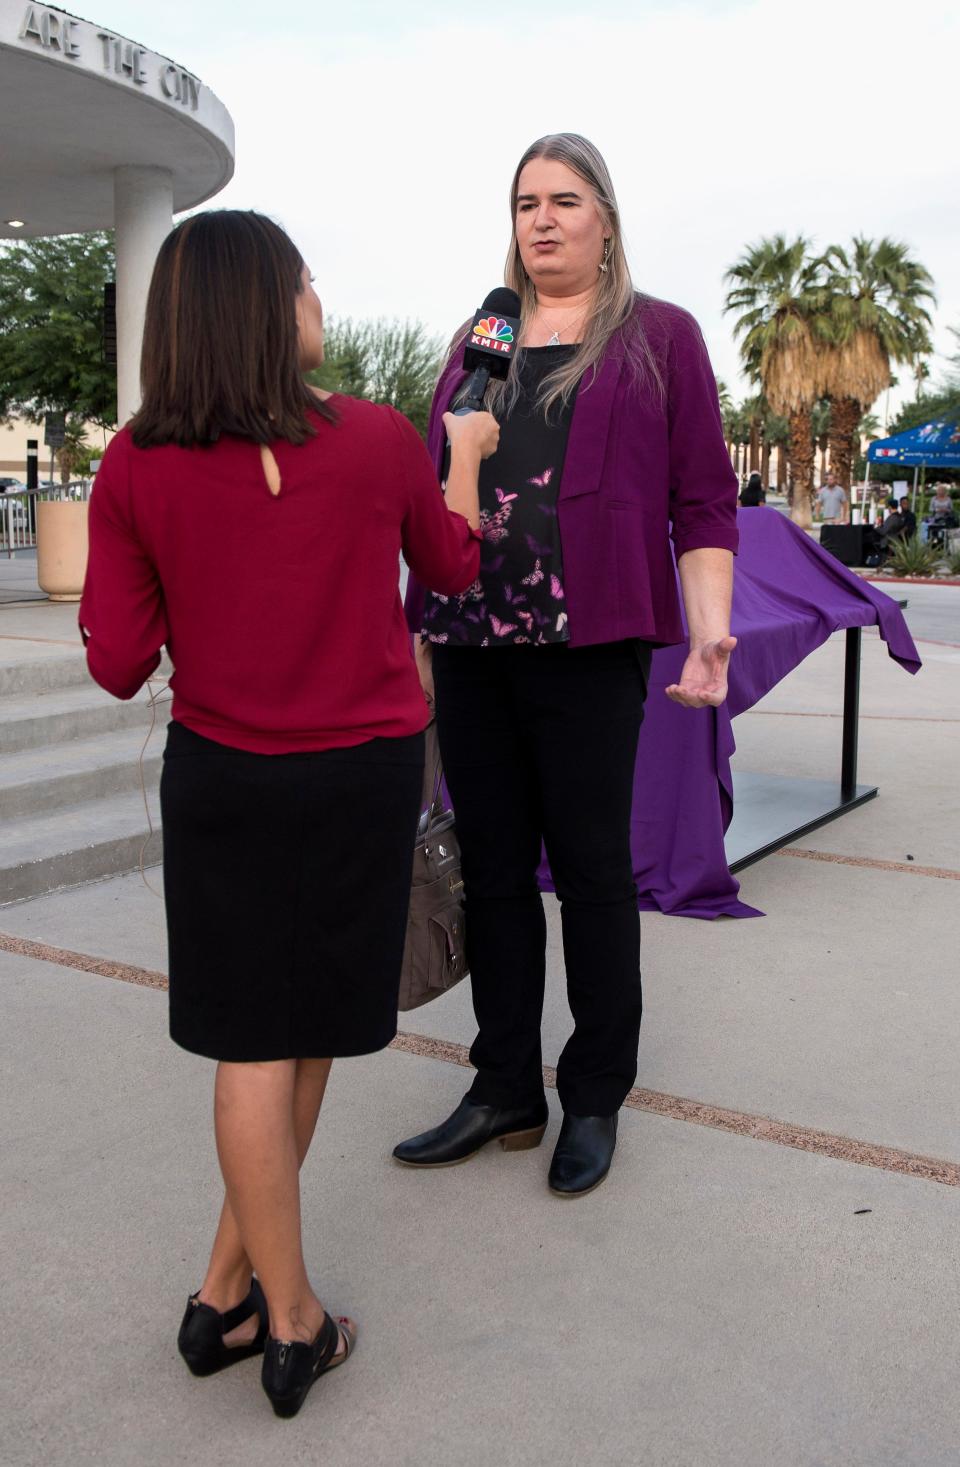 Gwendolyn Ann Smith is interviewed prior to a candlelight vigil at the Palm Springs City Hall as the Transgender Community Coalition honors the memory of those whose lives were lost in acts of anti-transgender violence in 2017.